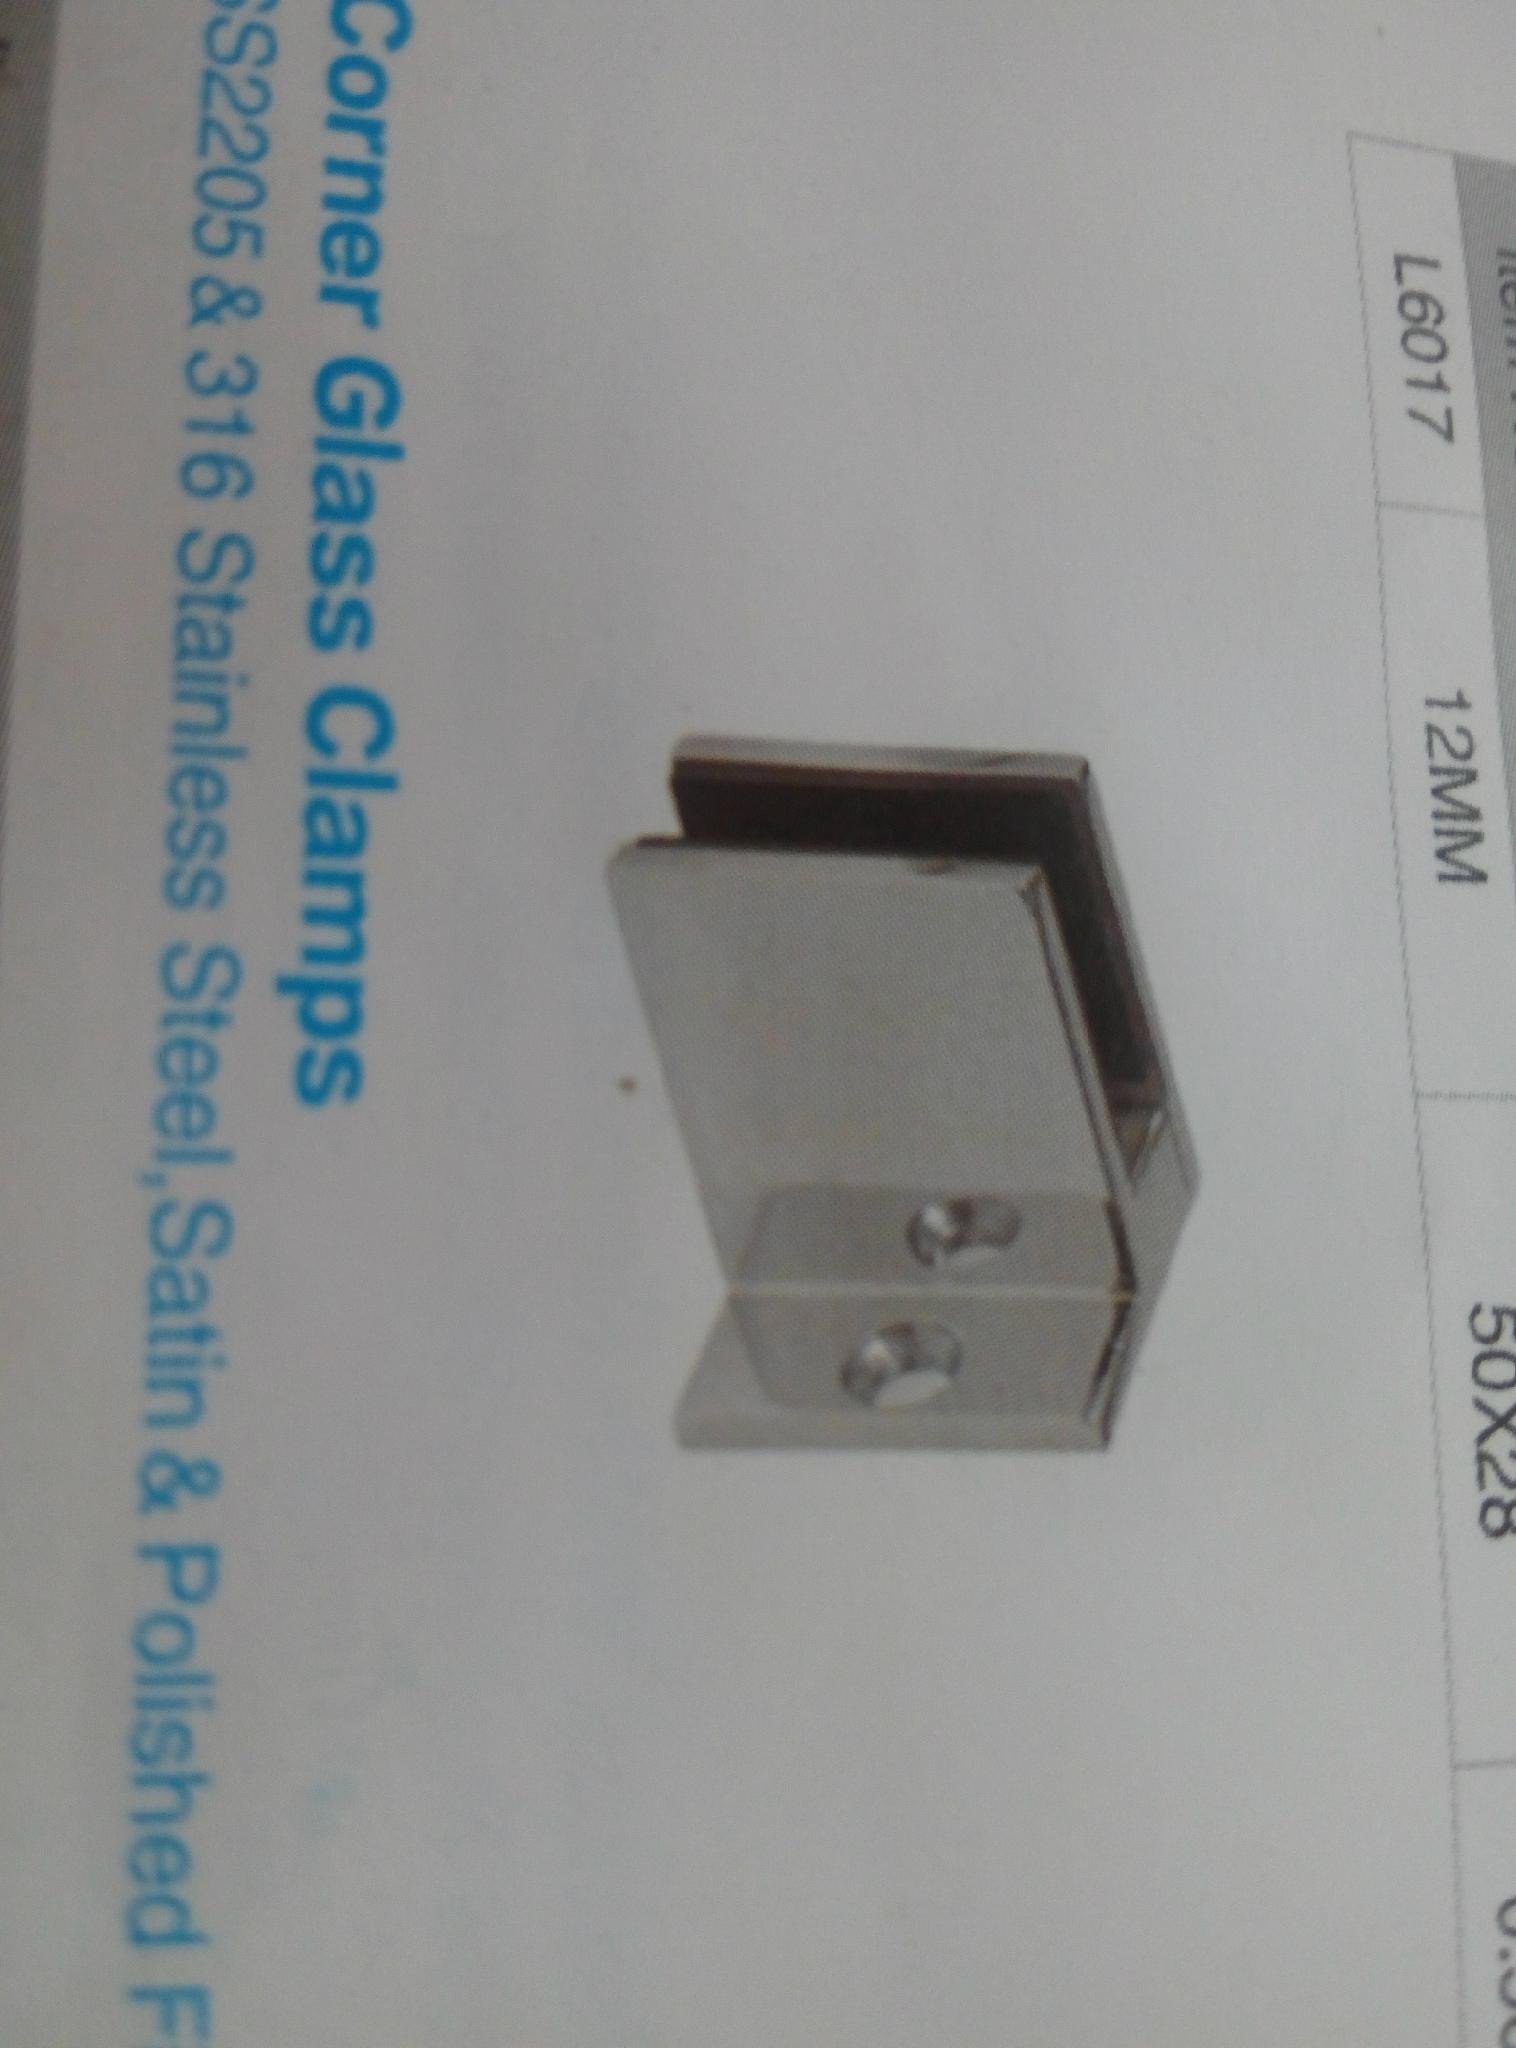 Stainless steel cotner glass clamps